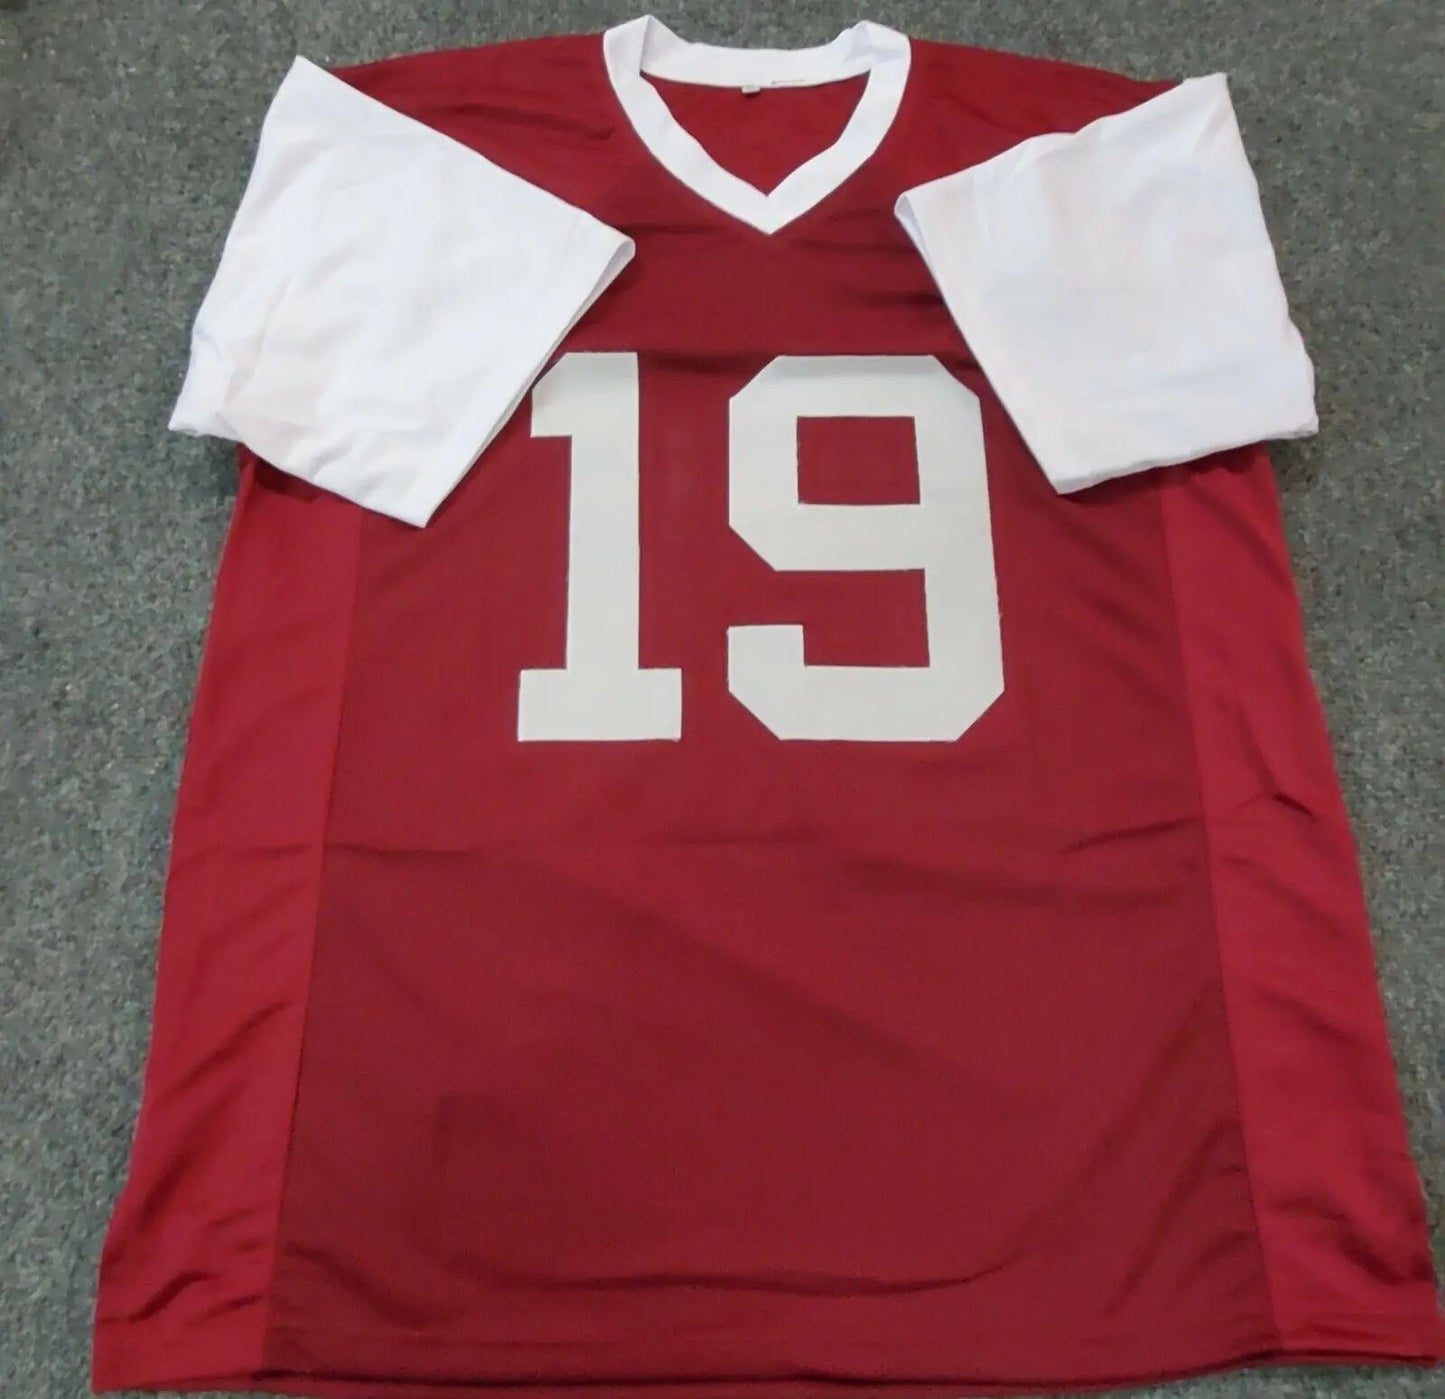 robby anderson jersey number